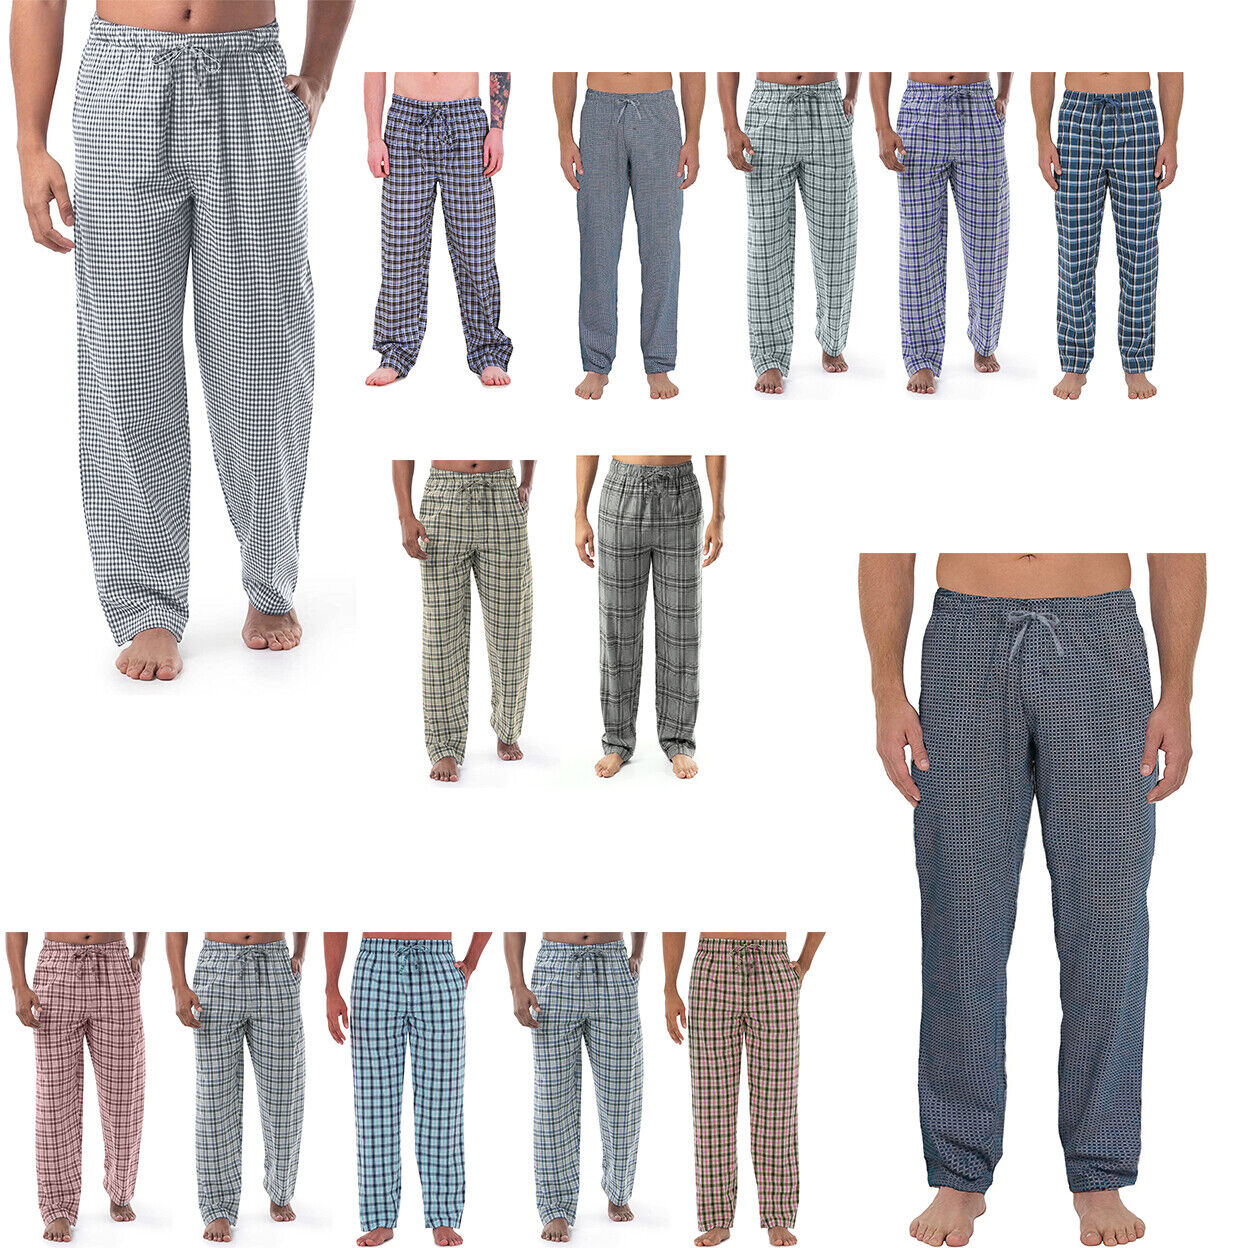 2-Pack: Men's Ultra-Soft Solid & Plaid Cotton Jersey Knit Comfy Sleep Lounge Pajama Pants - Solid & Plaid, Large